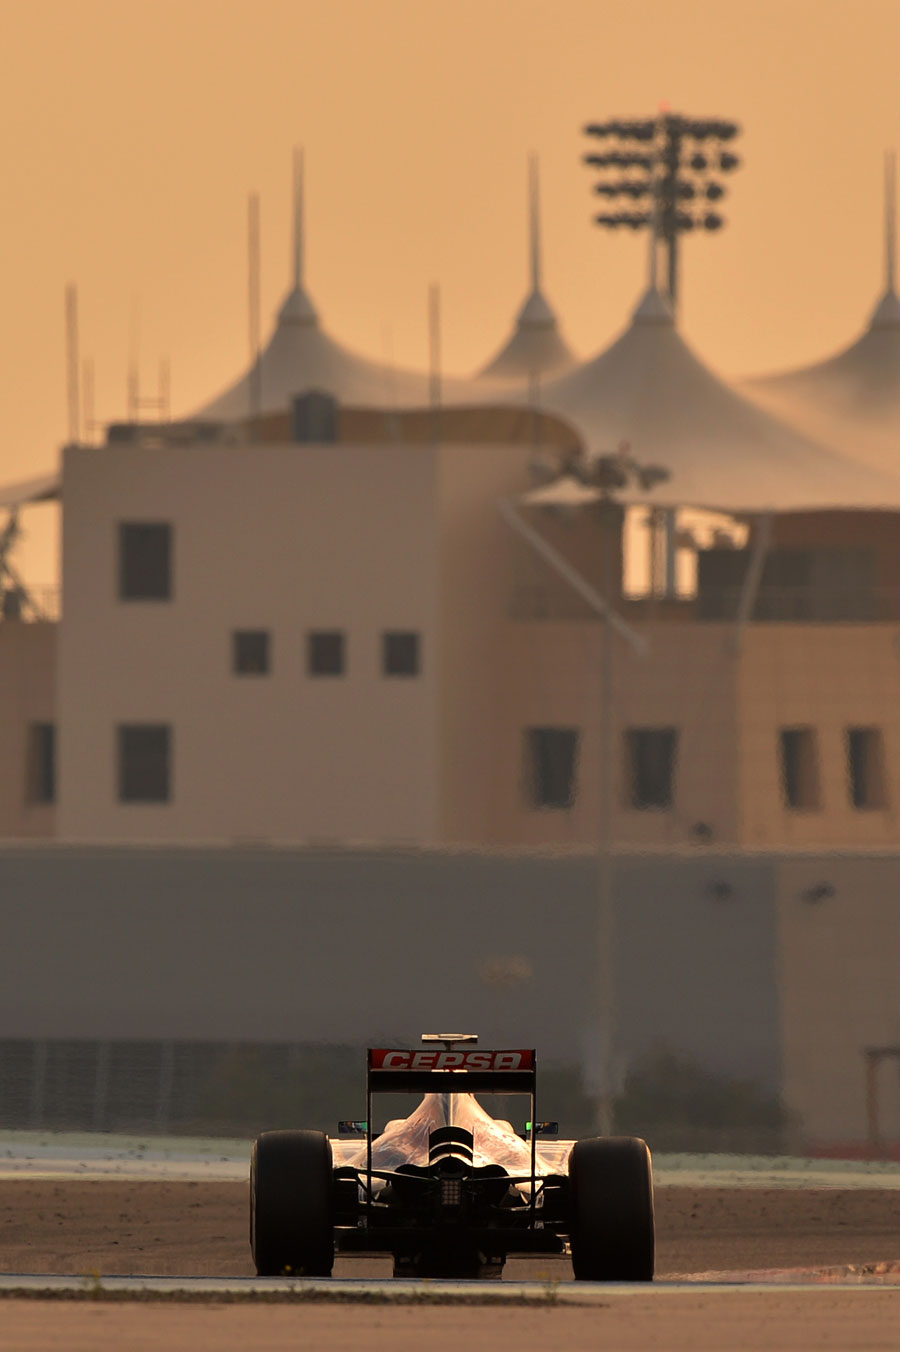 Jean-Eric Vergne on track in low light